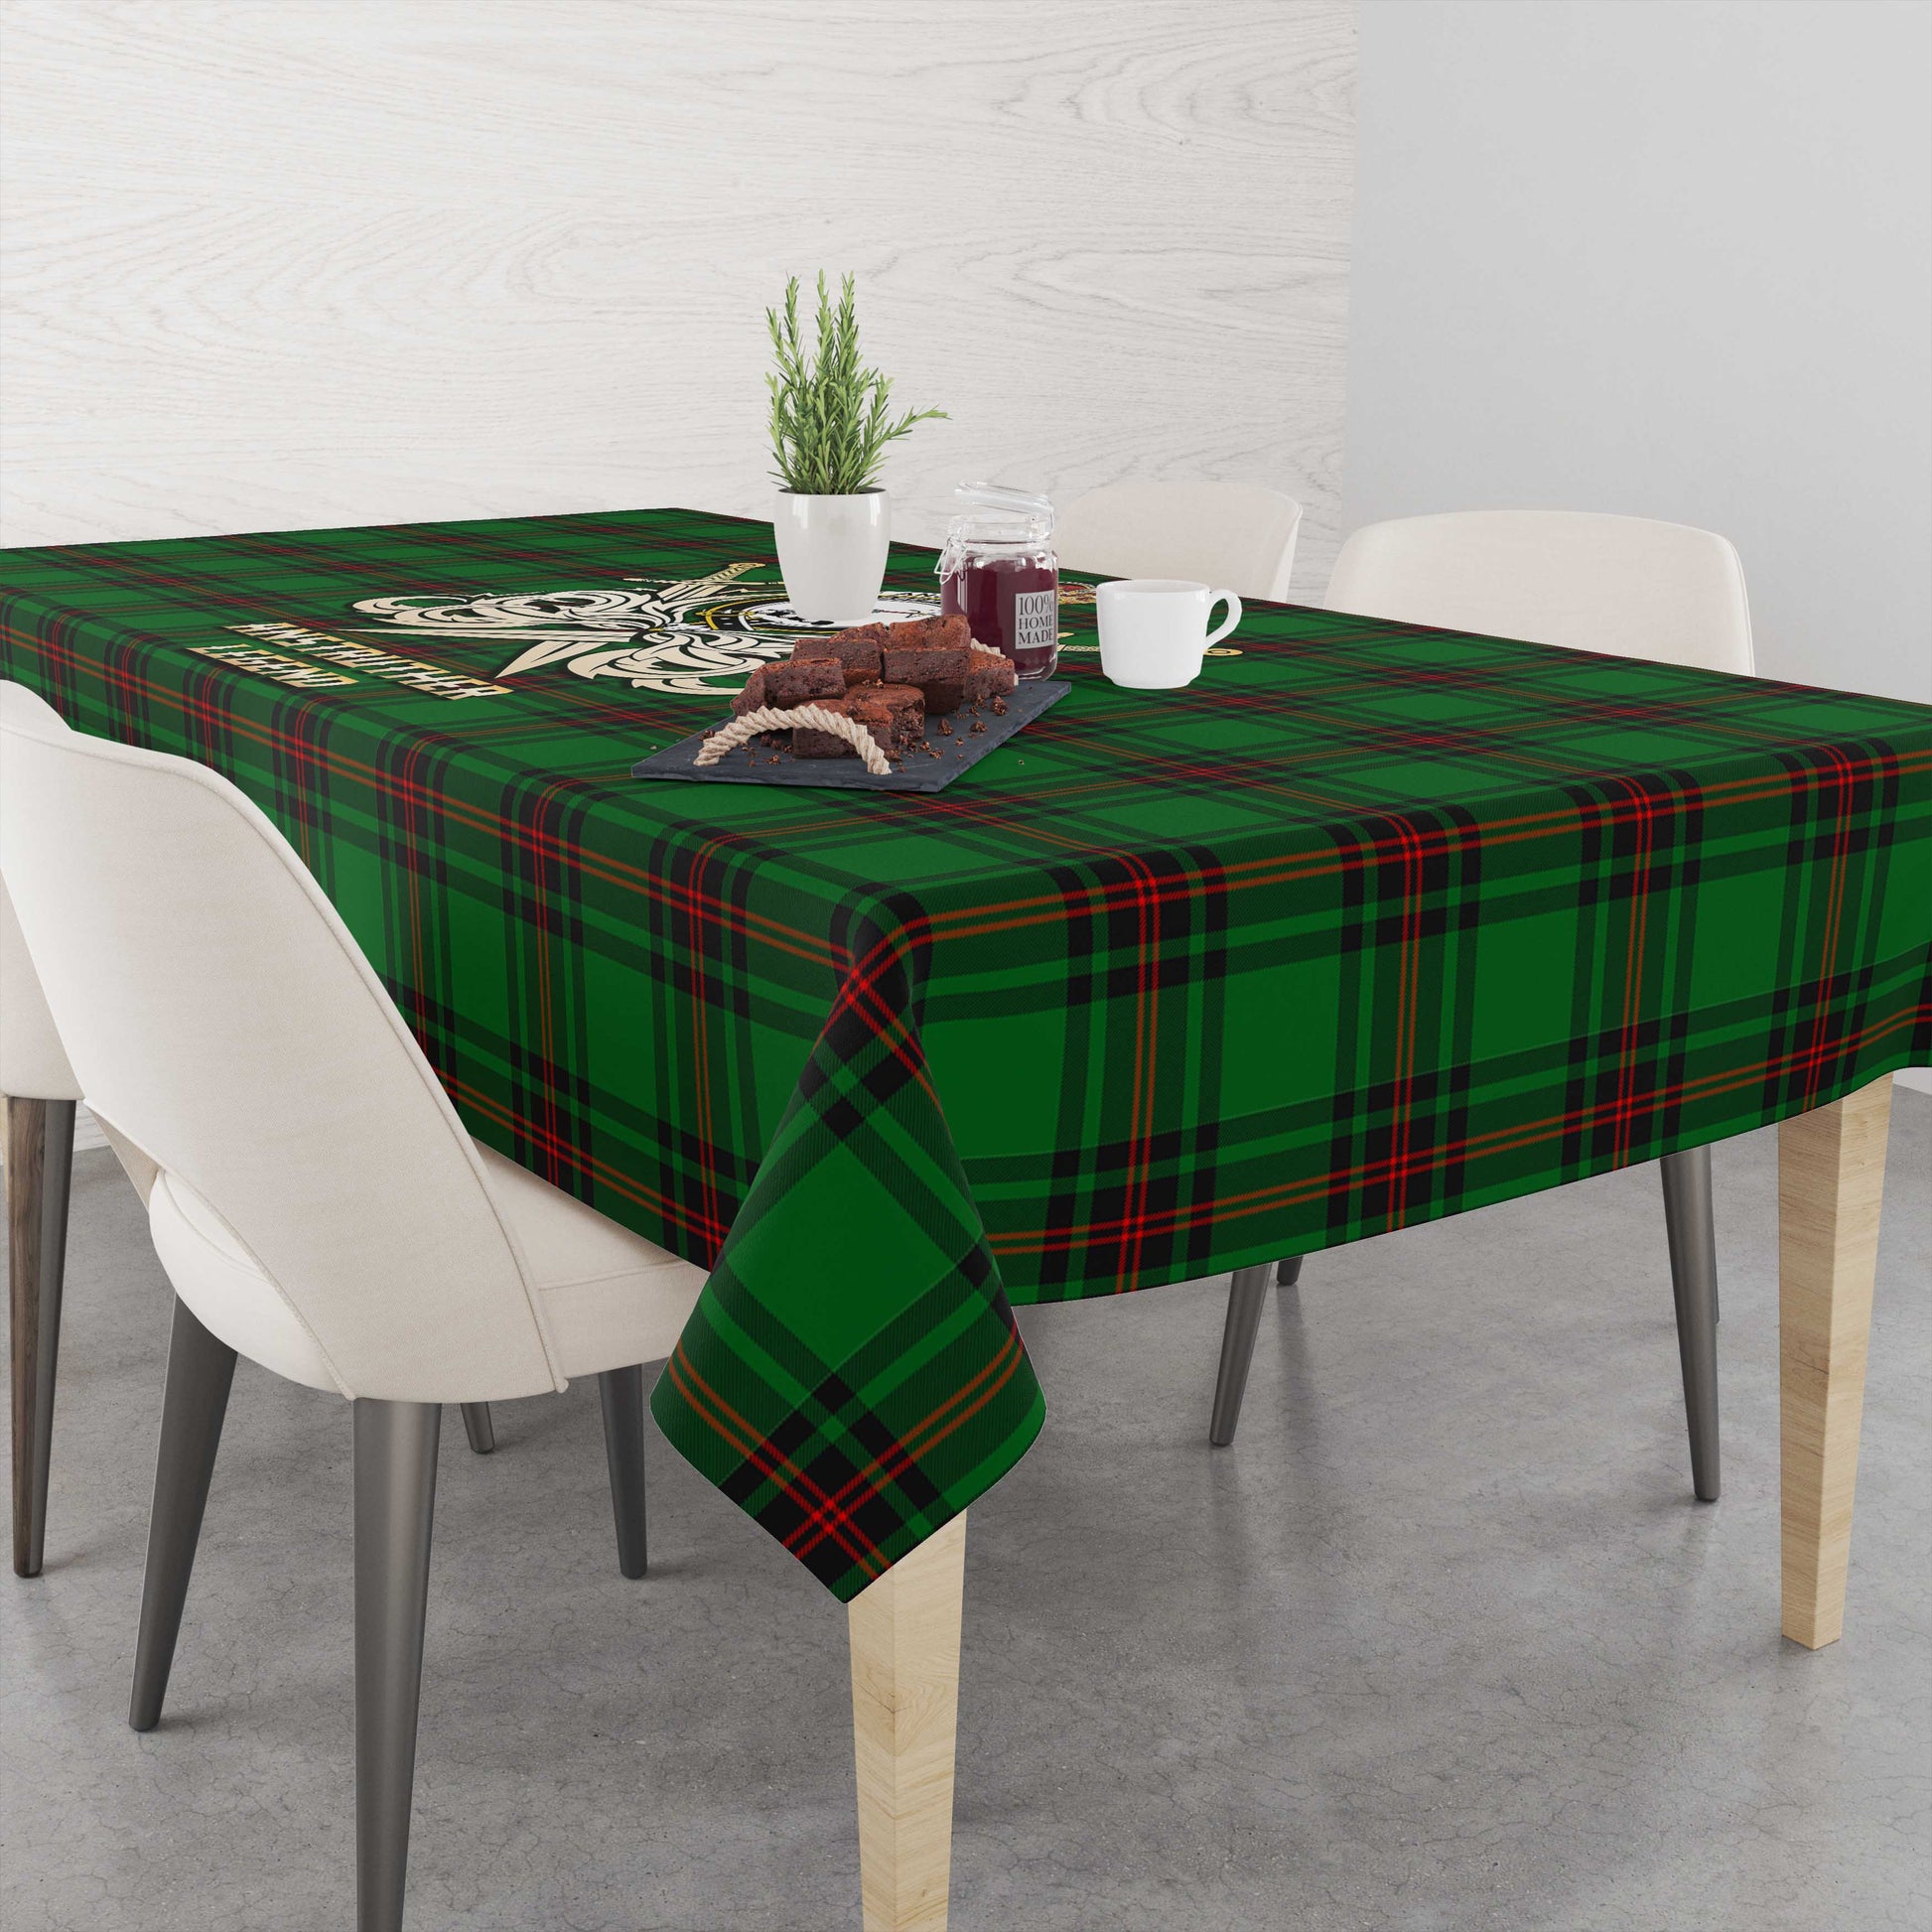 Tartan Vibes Clothing Anstruther Tartan Tablecloth with Clan Crest and the Golden Sword of Courageous Legacy